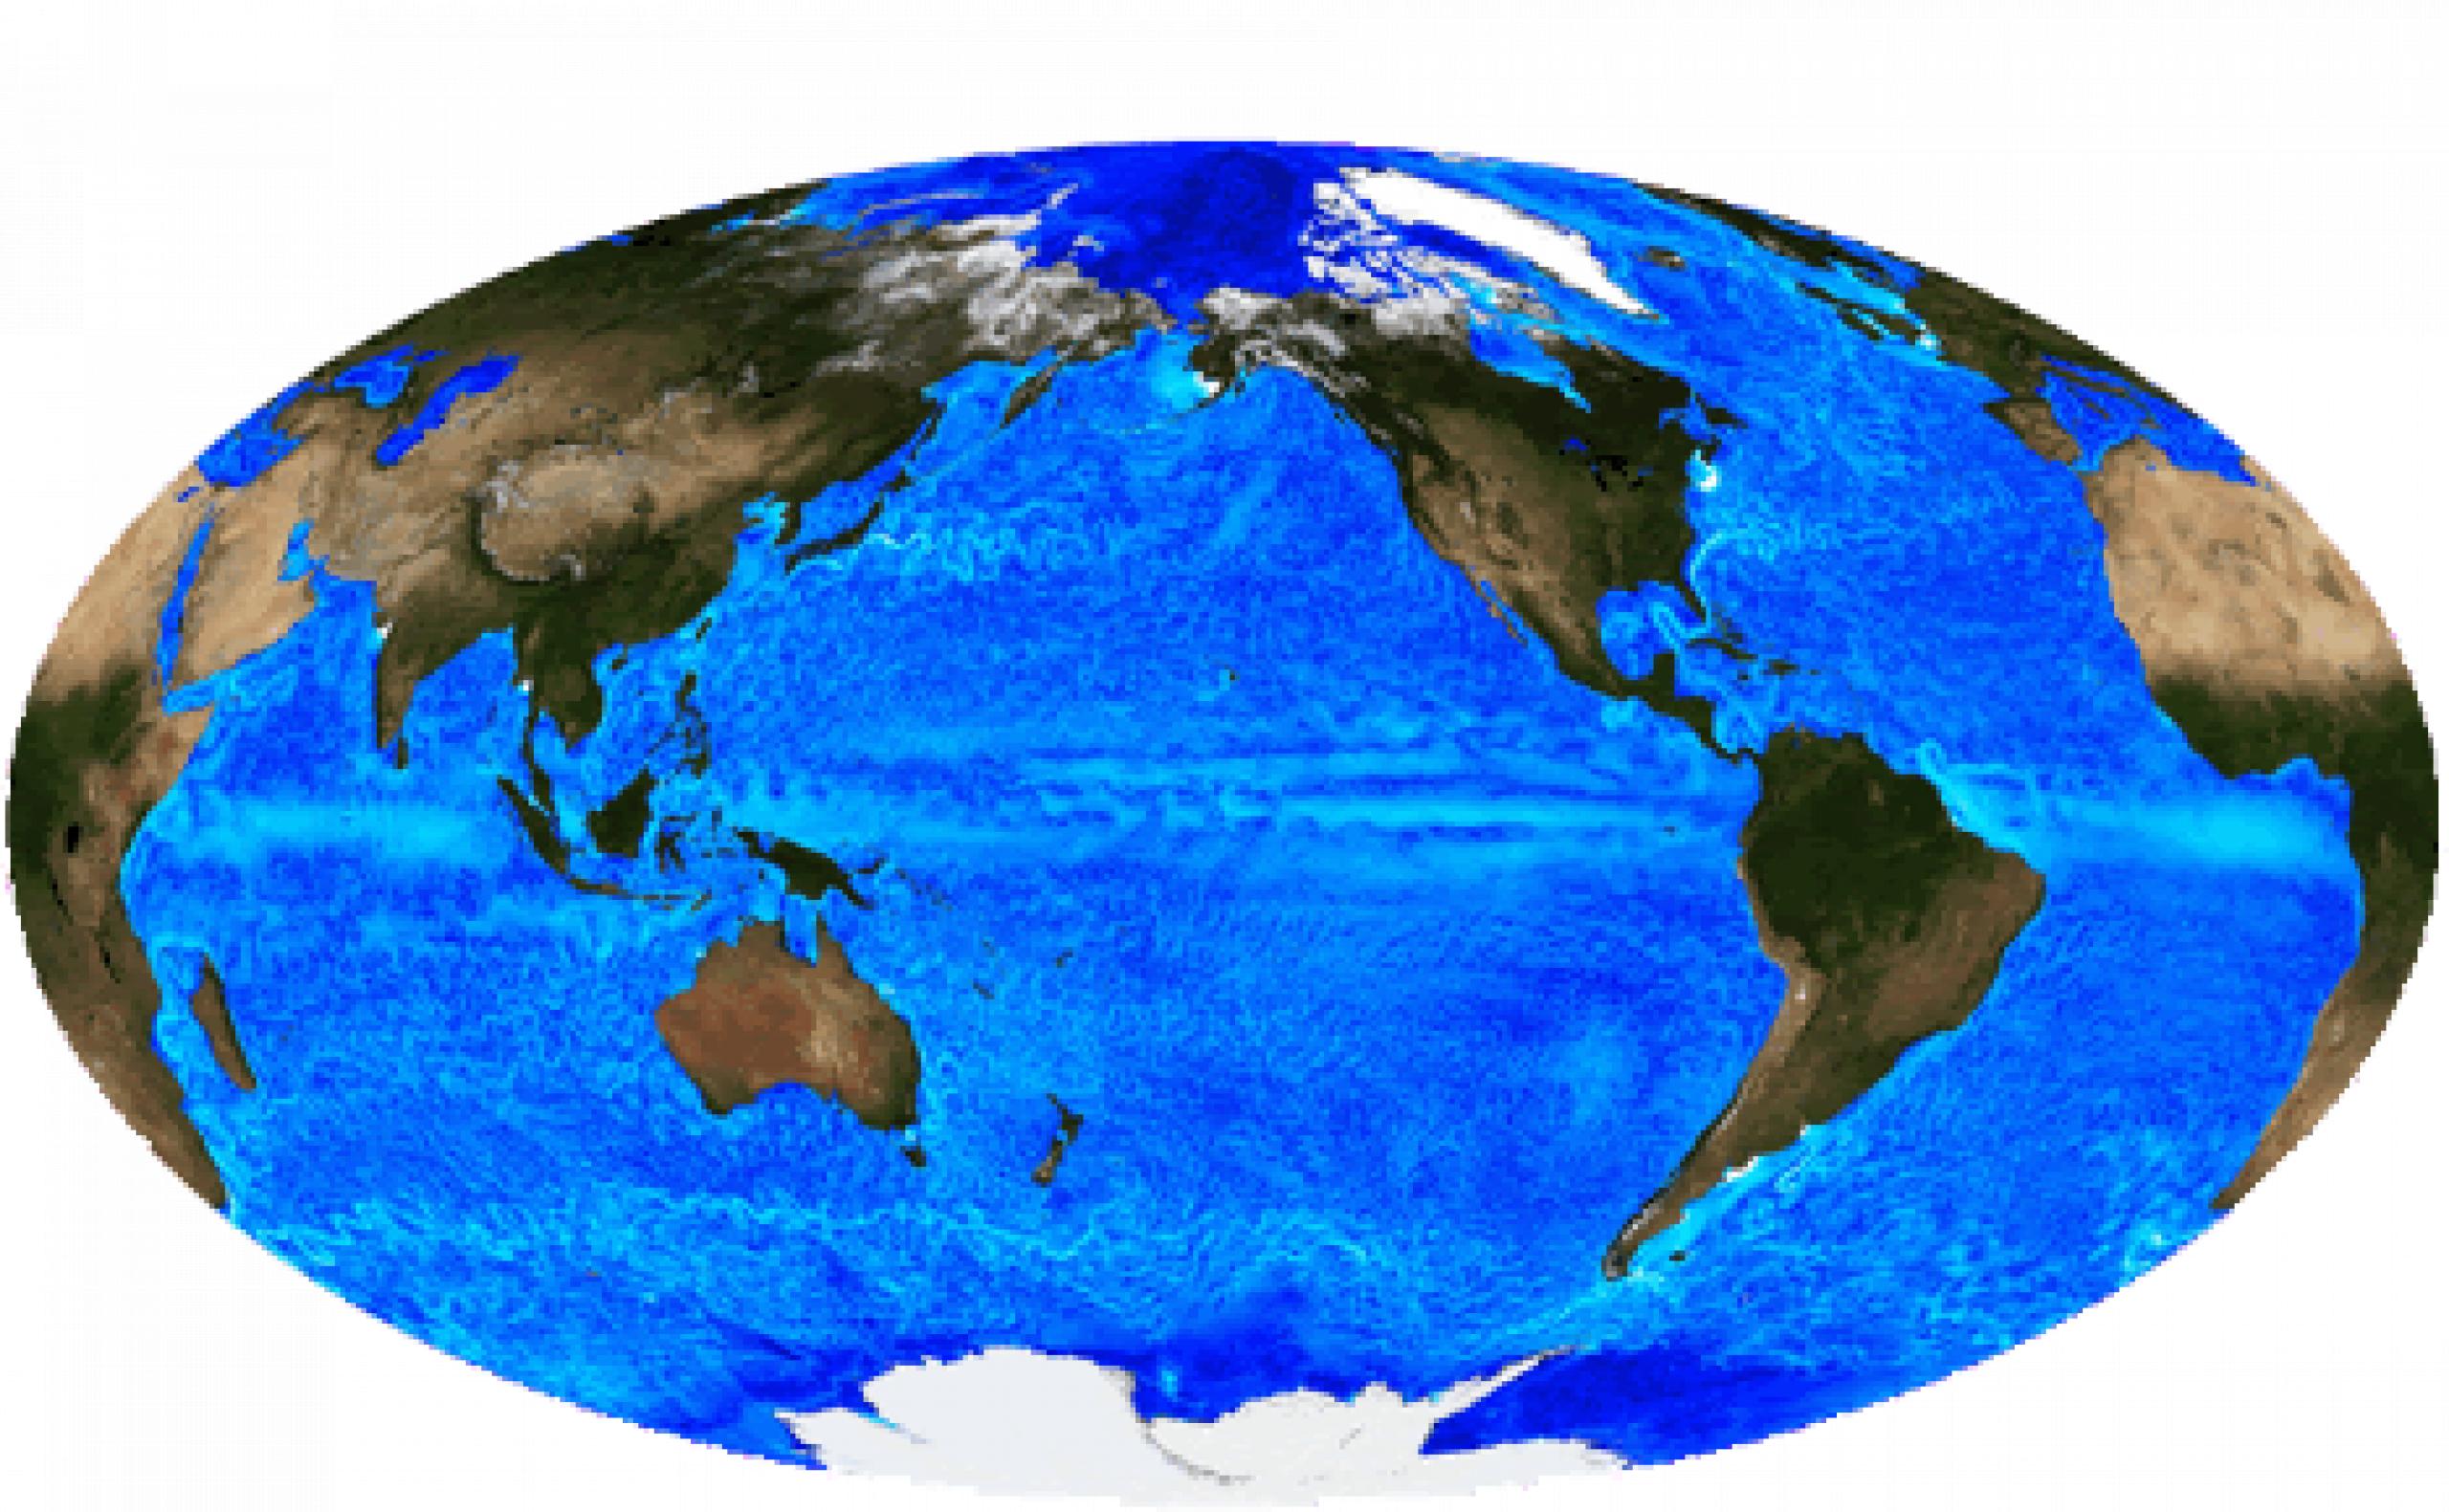 Satellite image of the globe showing ocean currents